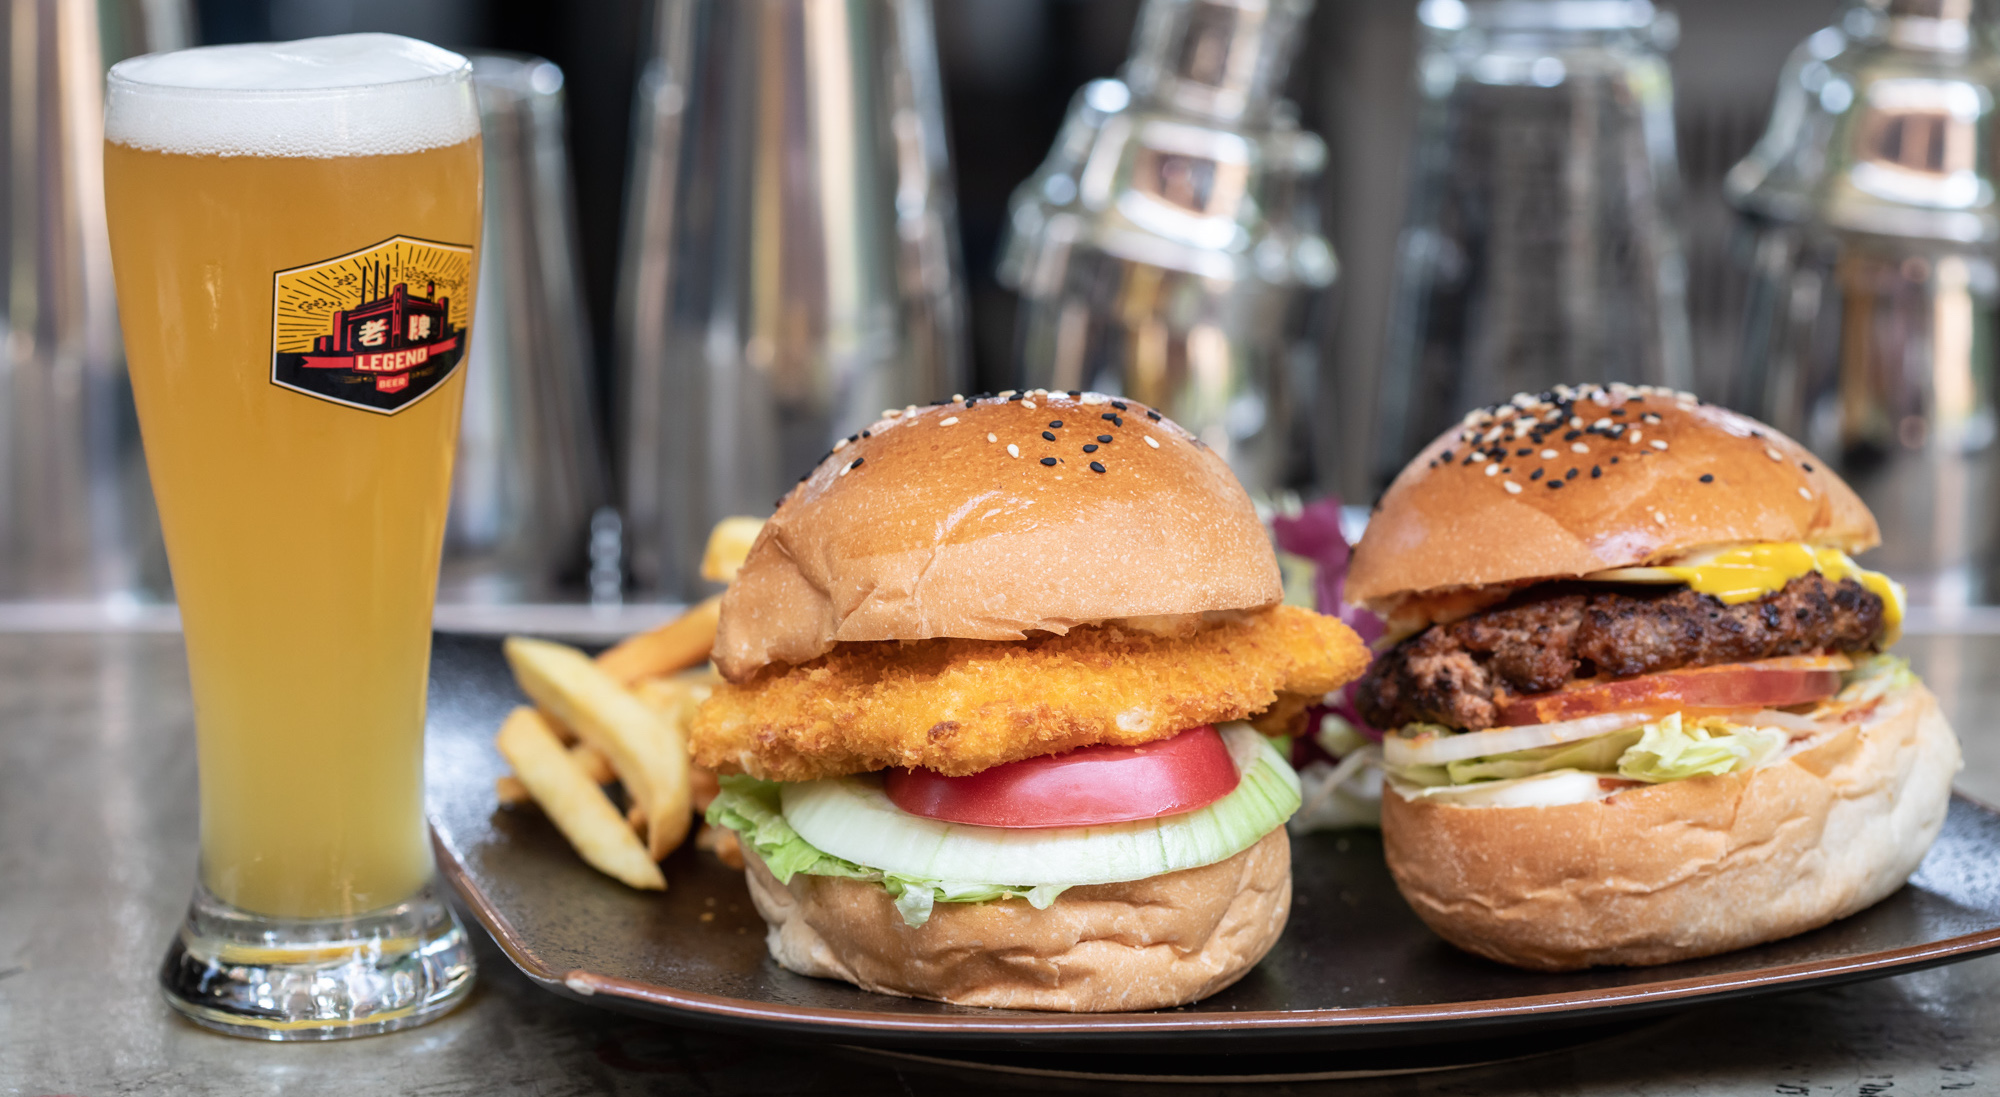 Legend Beer Hopes to Live Up to Its Name with Fish and Classic Beef Burgers